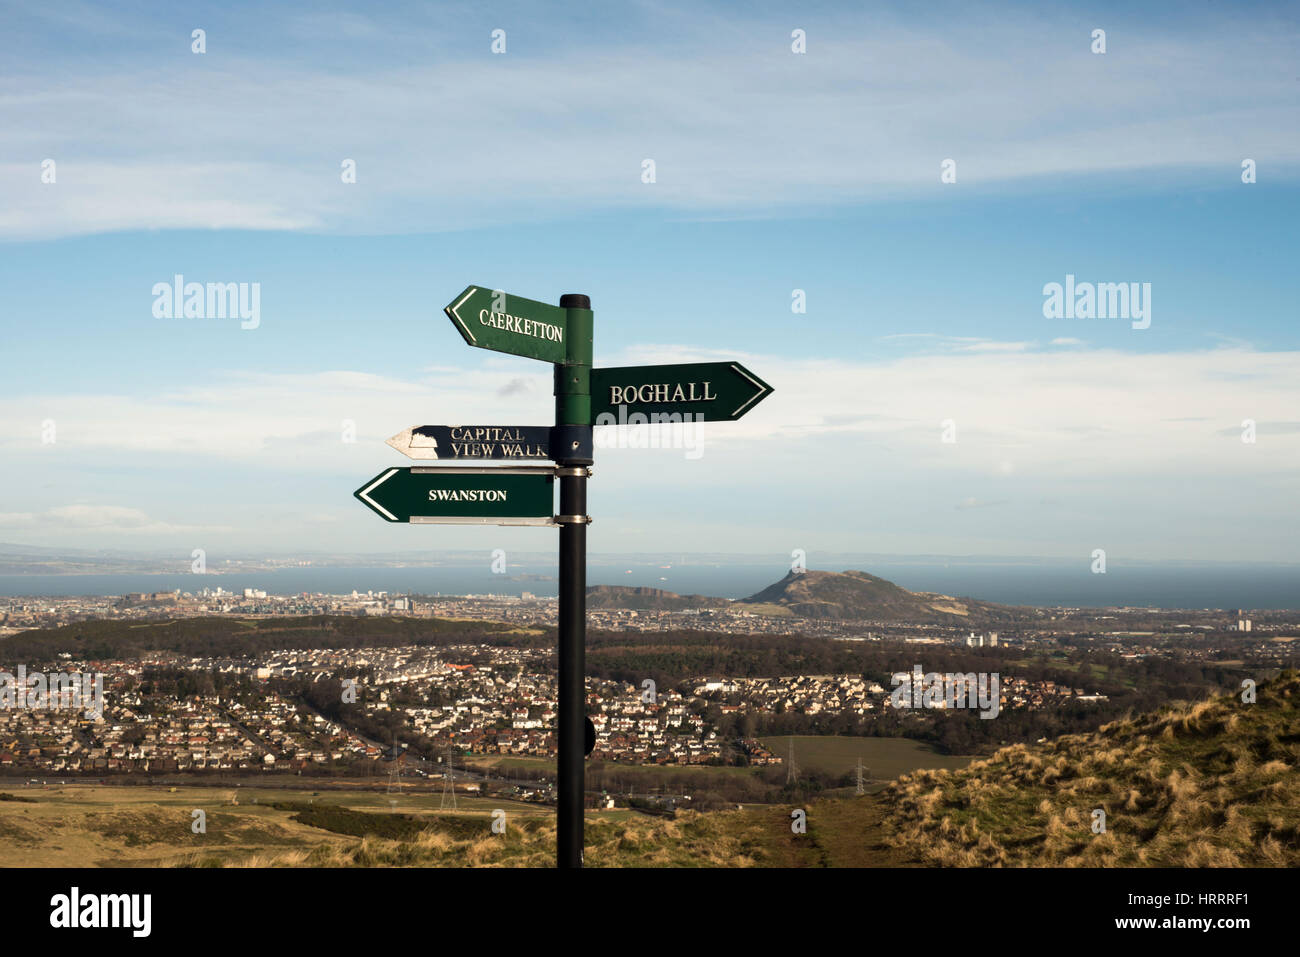 sign post at hillend edinburgh with arthurs seat in background. places are boghall swanston capital view walk Stock Photo